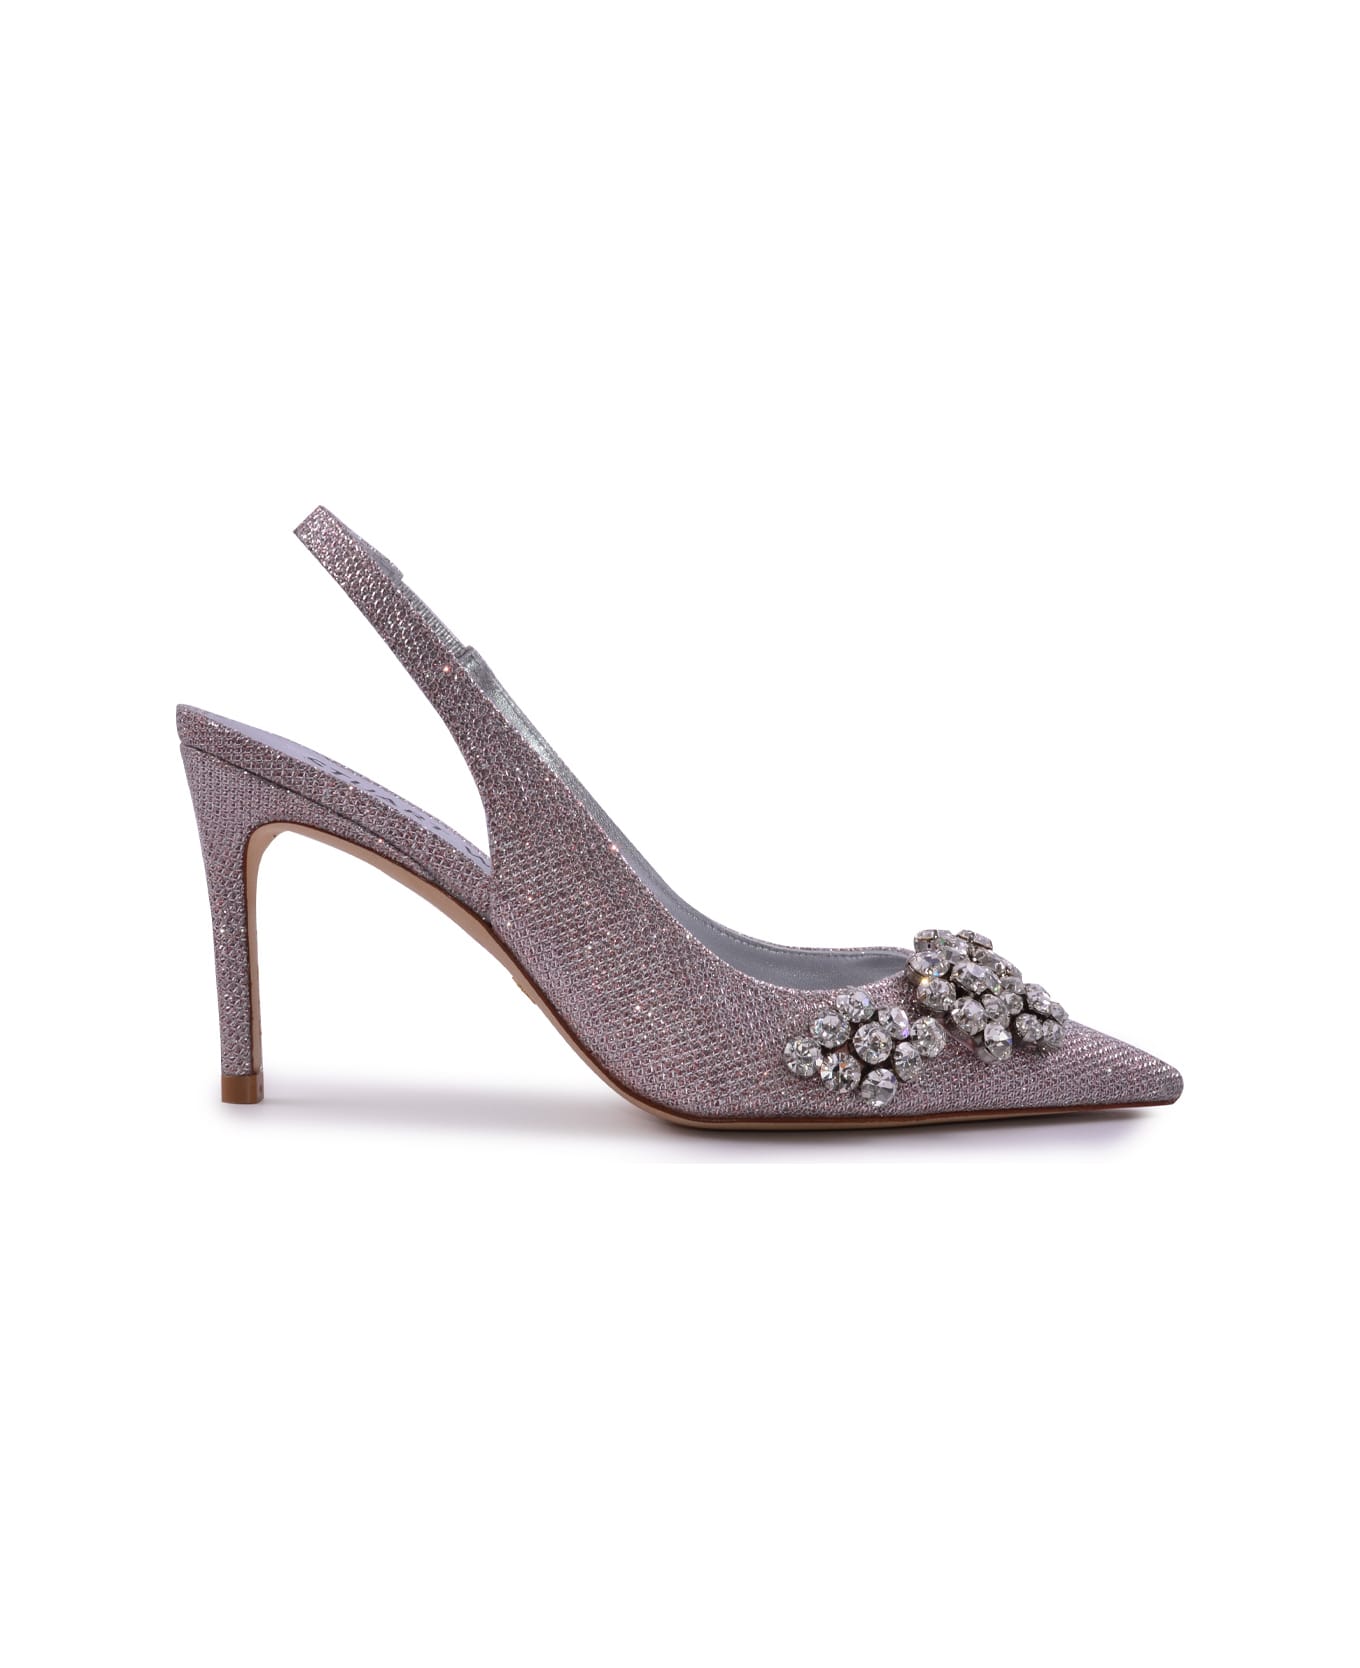 Stuart Weitzman Shoes With Heels And Crystals - Pink ハイヒール